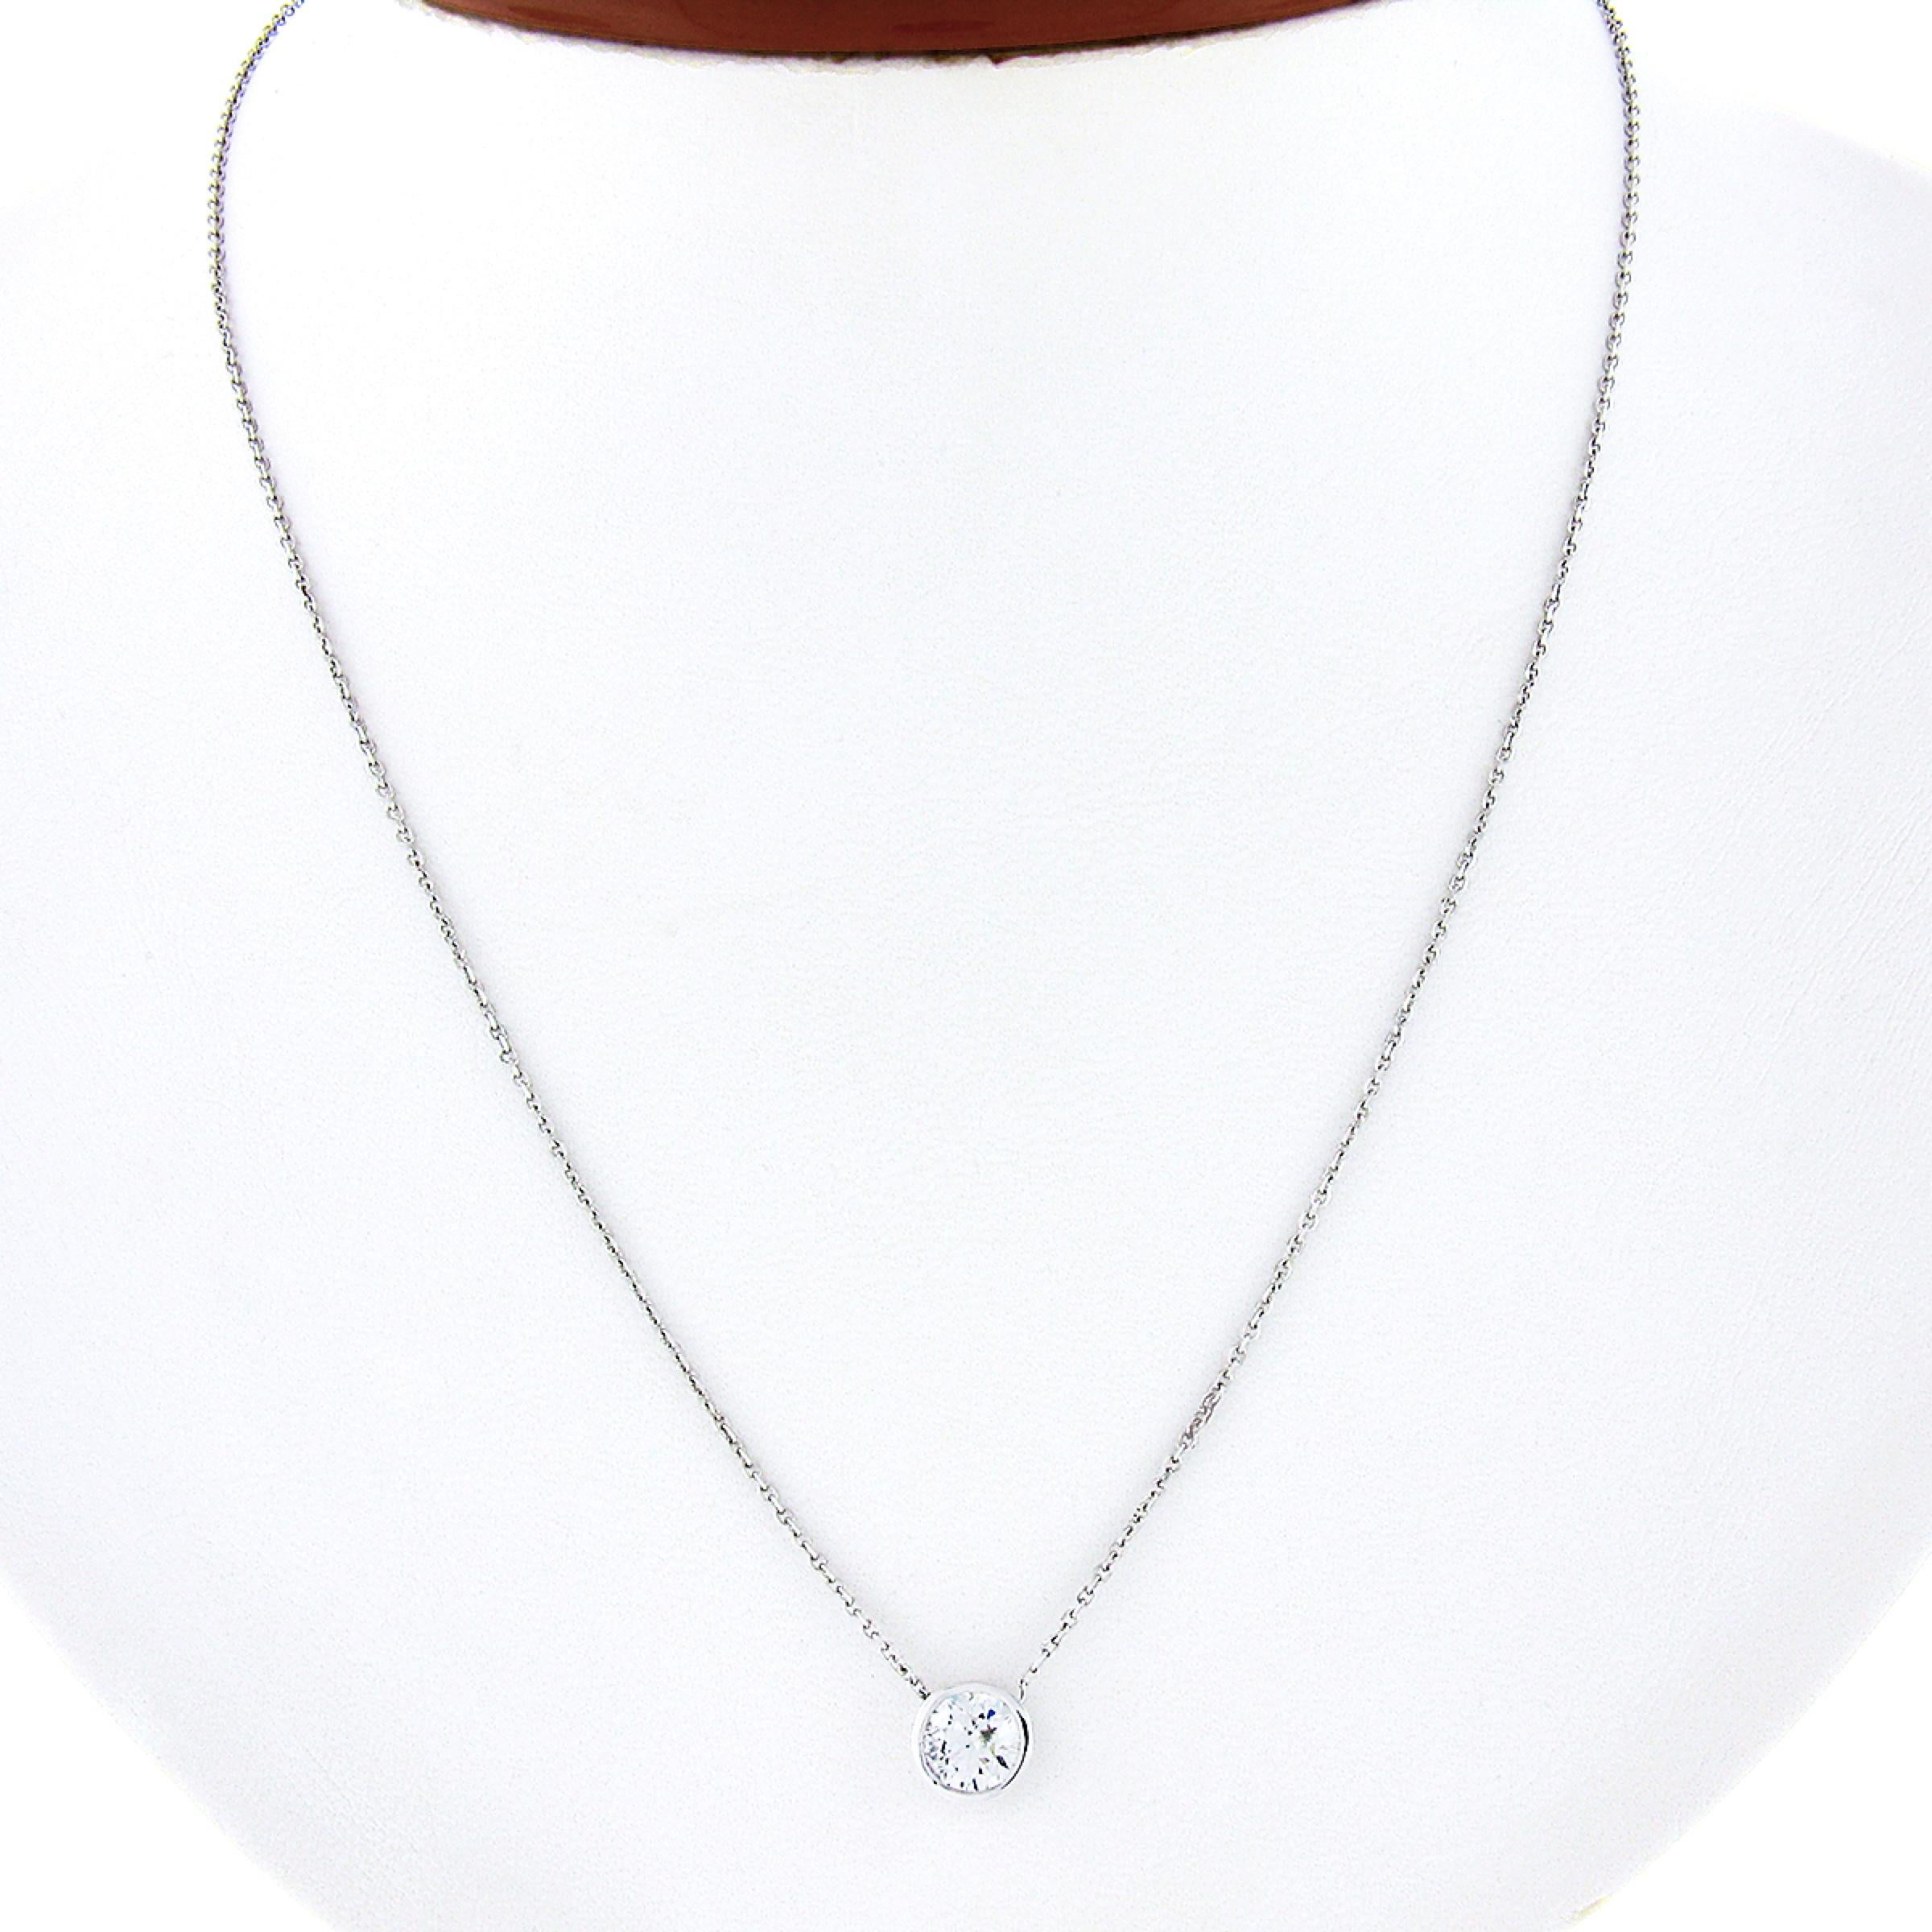 You are looking at a stunning and classically styled diamond solitaire pendant that is newly crafted in solid 14k white gold. The large and fiery diamond on this pendant is outstandingly brilliant having near colorless G color, SI2 clarity, and